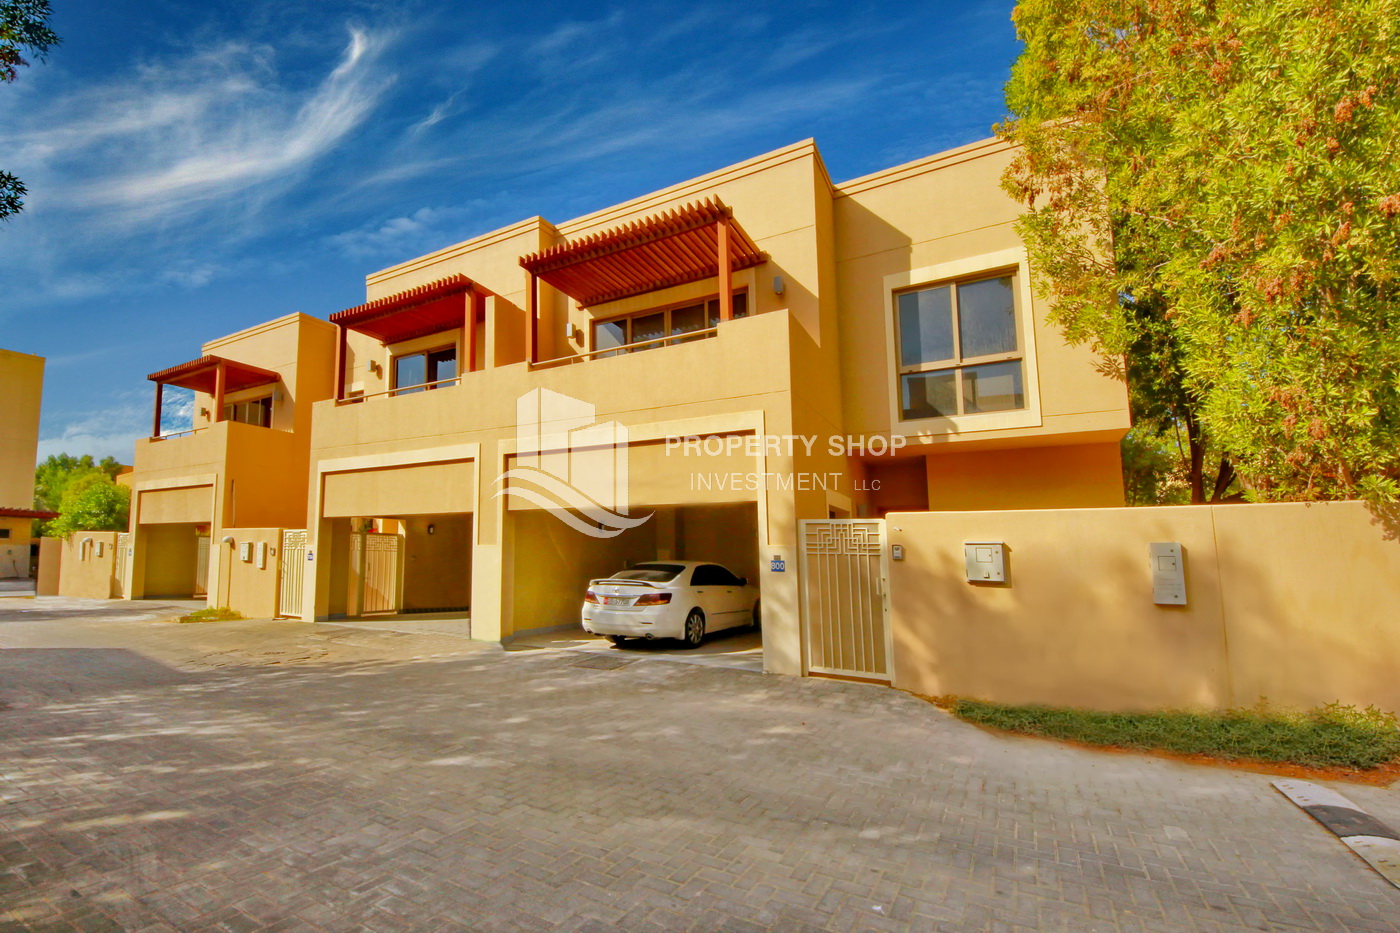 4 beds vilaa (TYpe S) in Al Raha Gardens – Al Tharwaniyah community for sale at a good price !